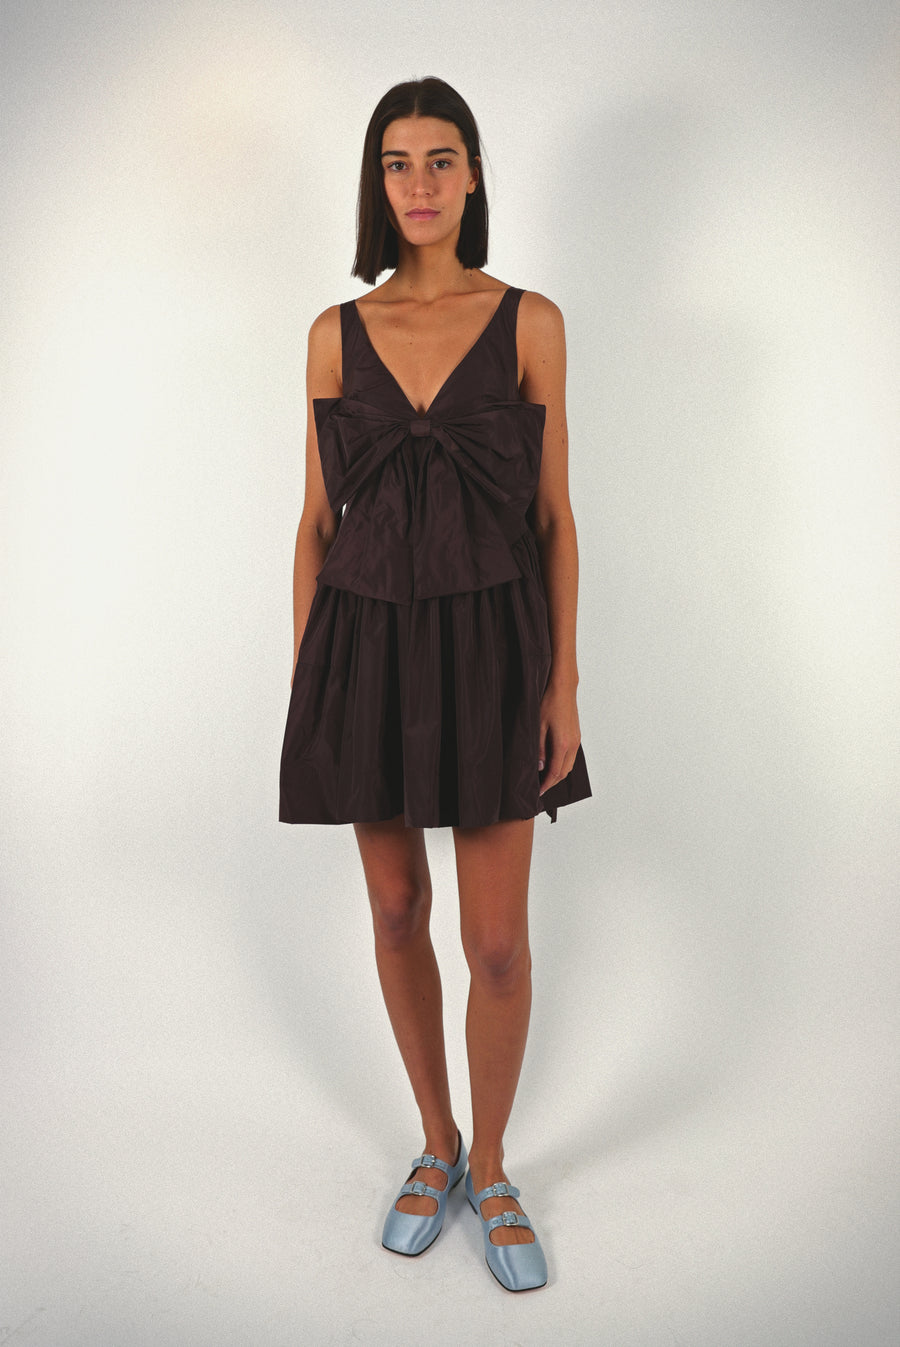 Mini dress in coffee brown taffeta with bow at front and cape in back on model